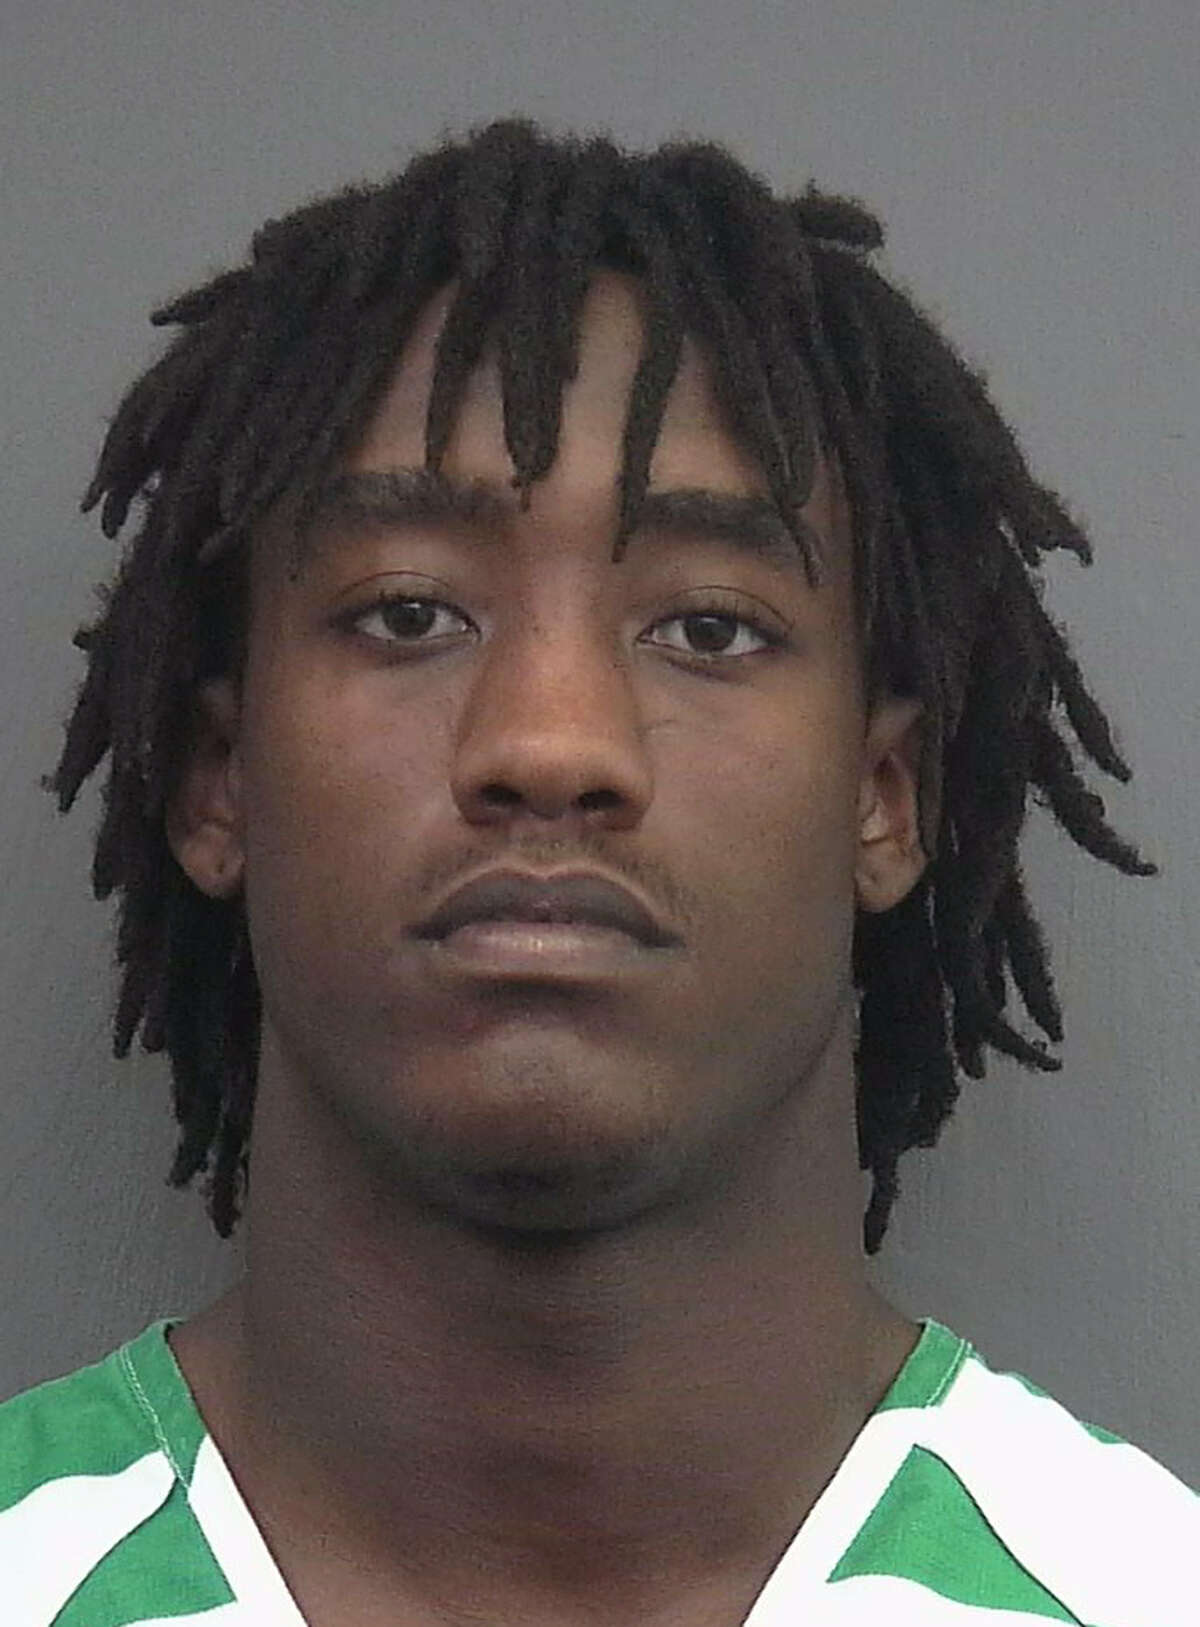 This image provided by the Alachua County Jail shows Florida freshman defensive back Deiondre Porter.